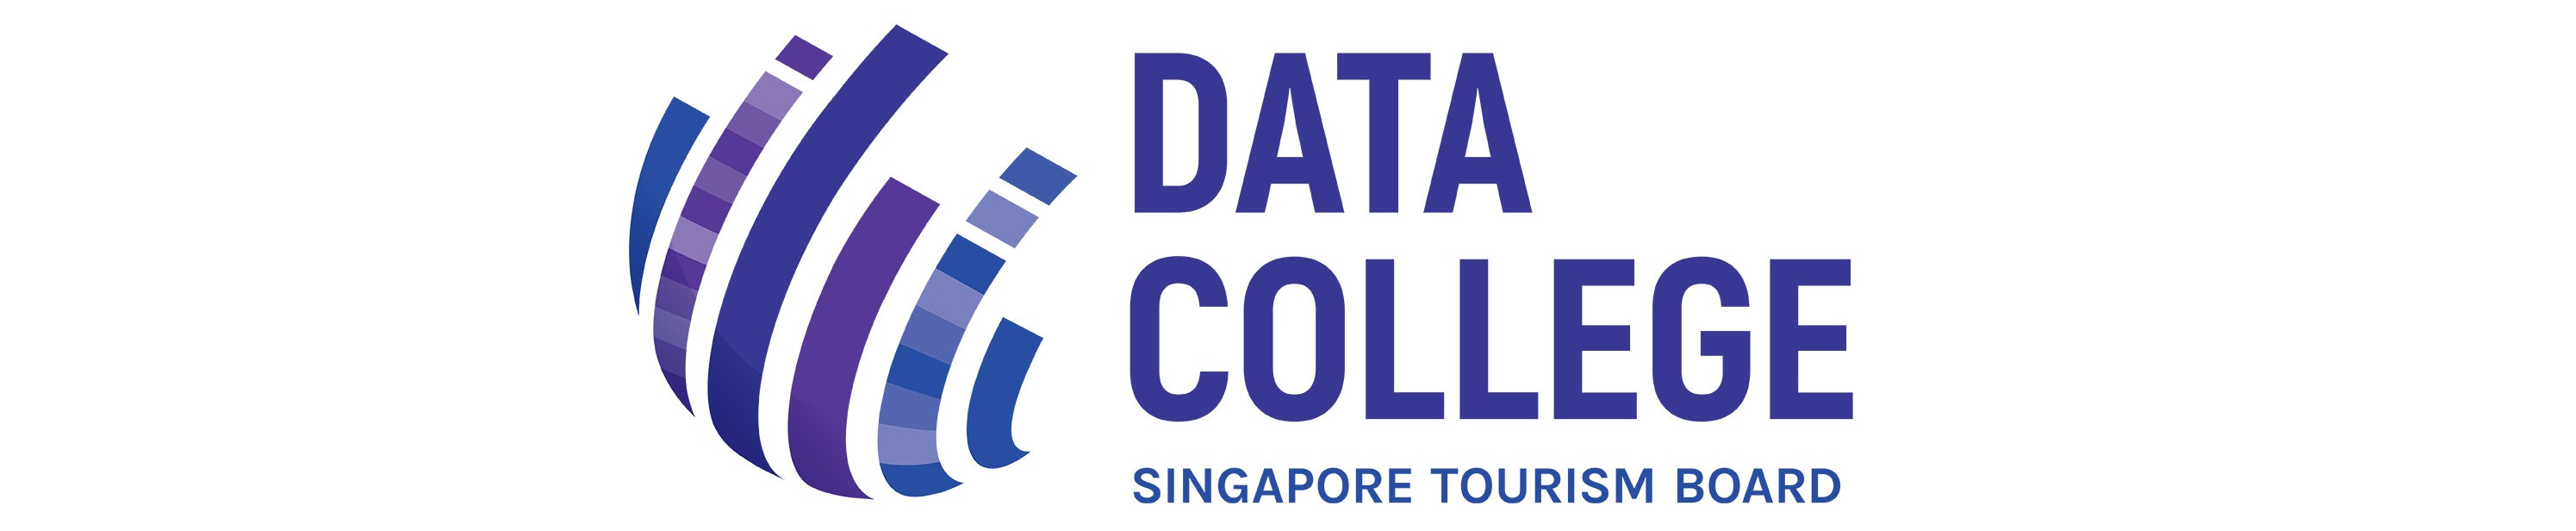 Launch of Data College